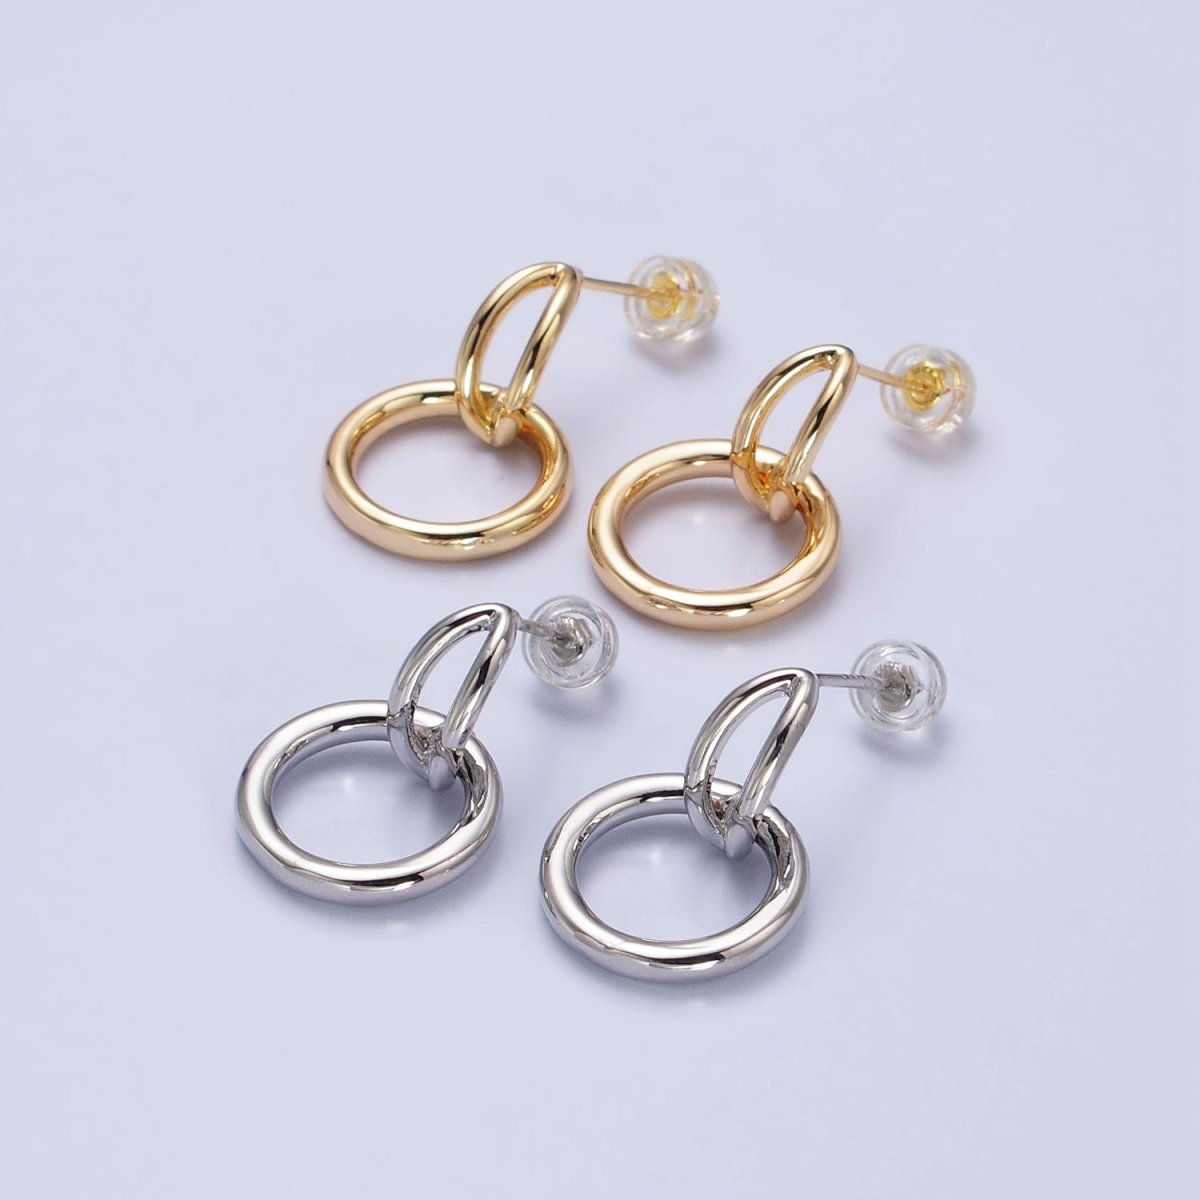 24K Gold Filled Intertwine Geometric Round Drop Double Bar Stud Earrings in Gold & Silver | AB356 AB357 - DLUXCA